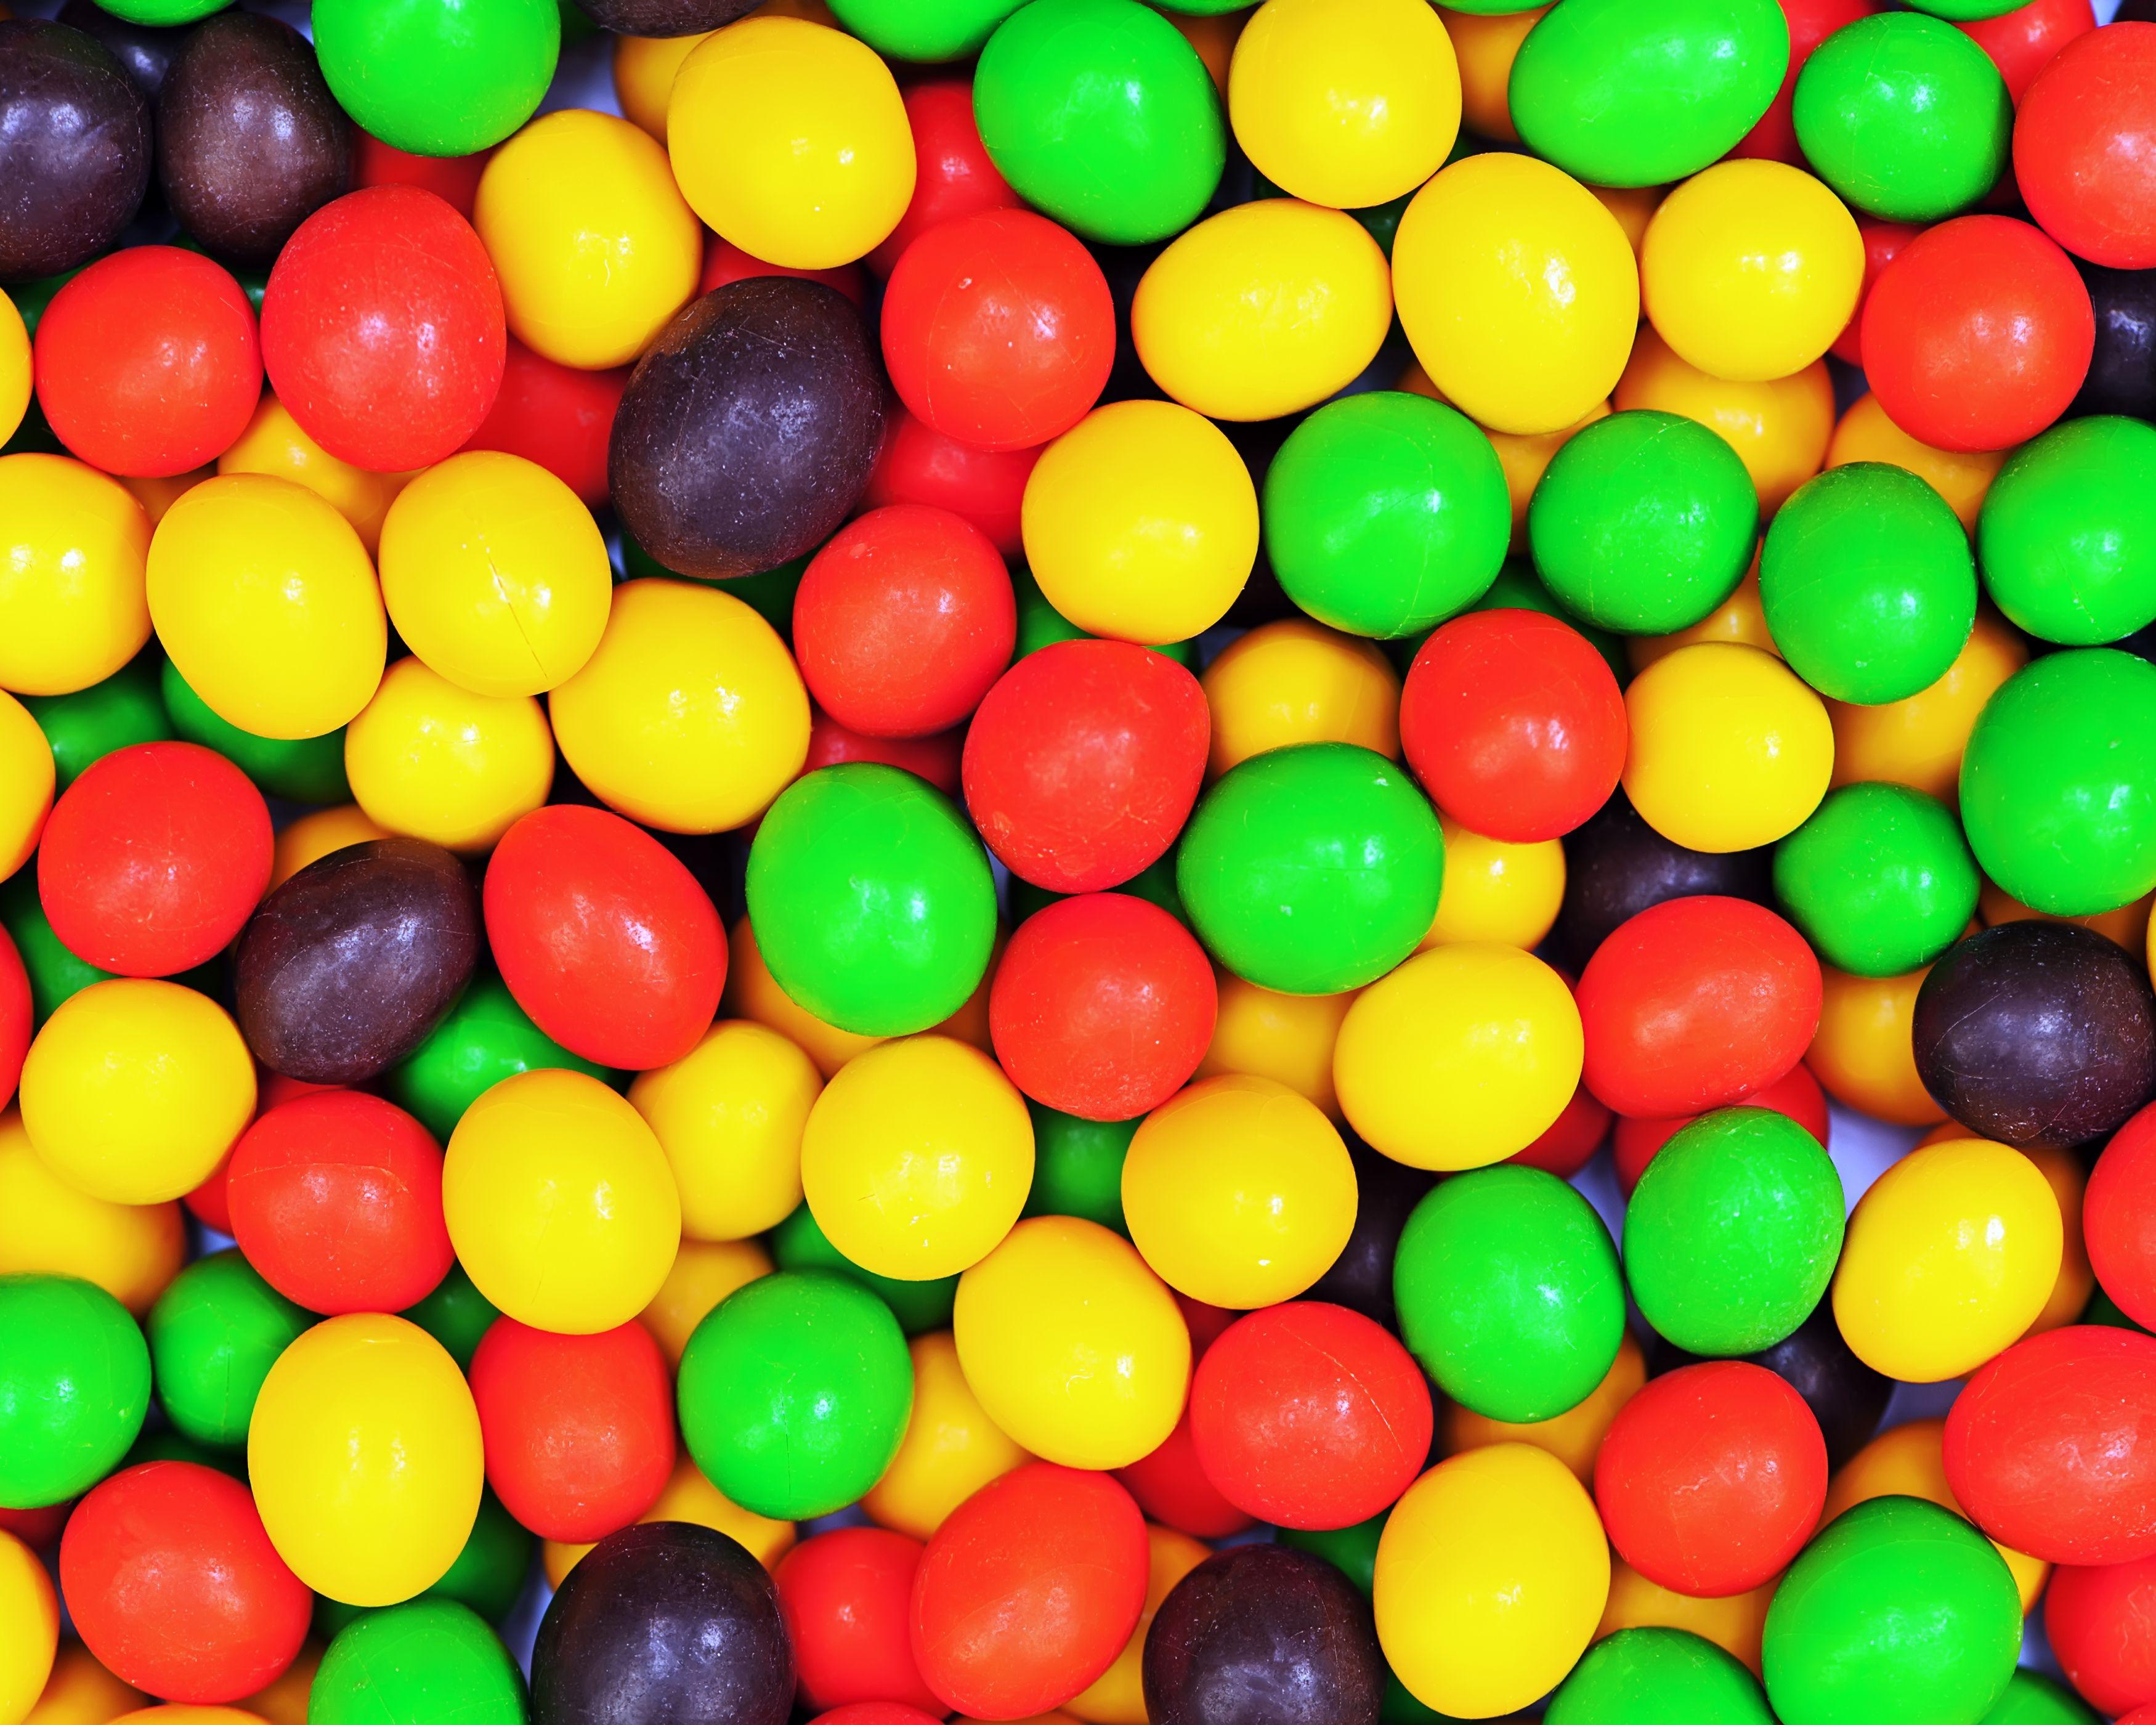 This may be why there are so many more yellow Skittles than any